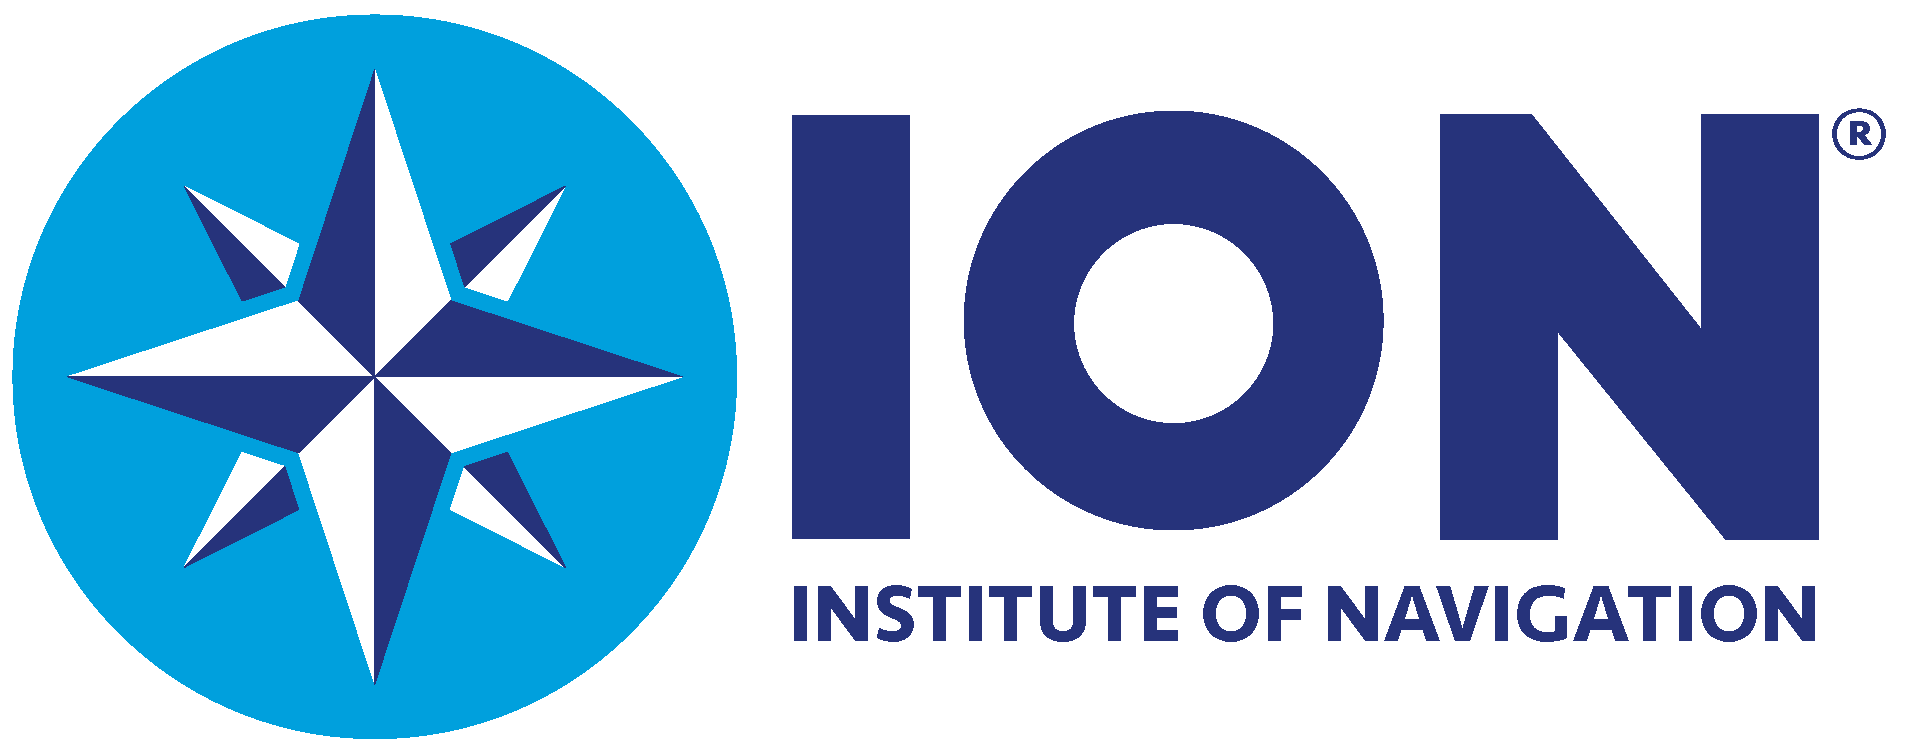 Nominations Being Taken for ION Fellows and Annual Awards